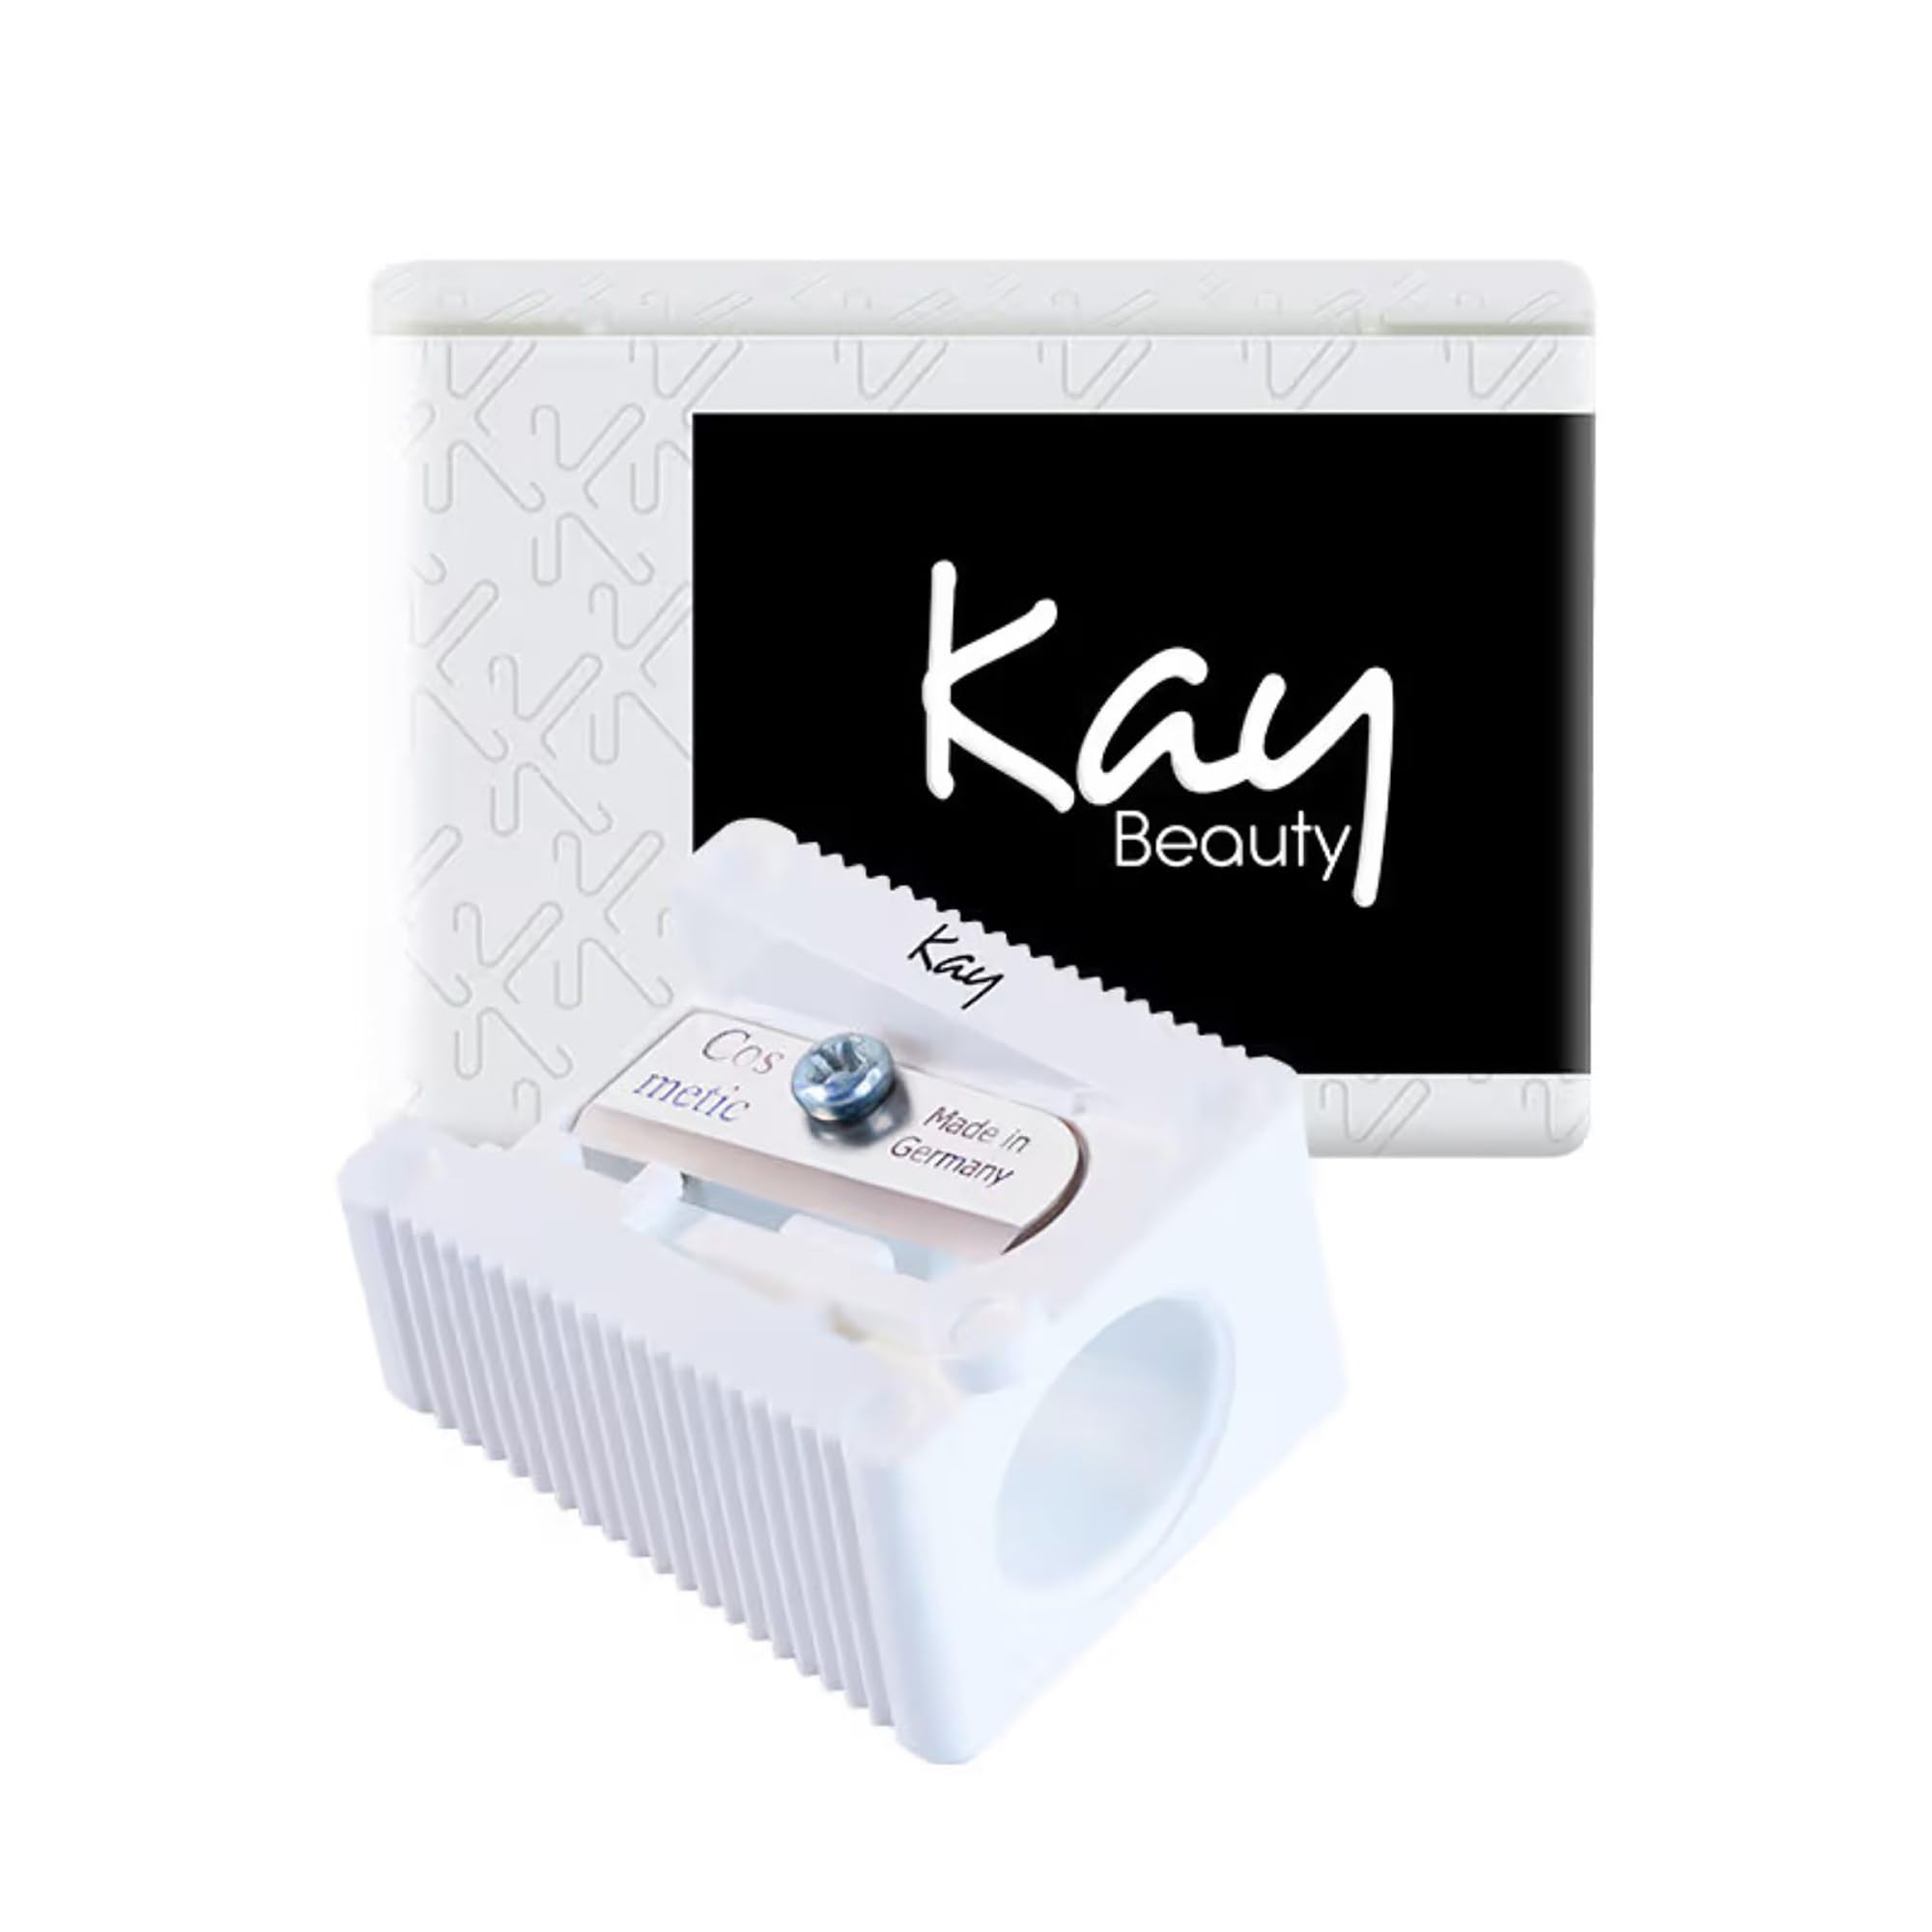 Kay Beauty Chubby Cosmetic Sharpener - Travel Friendly, Convenient, Easy to Clean Tool, to Sharpen Lip Liner & Eyeliner